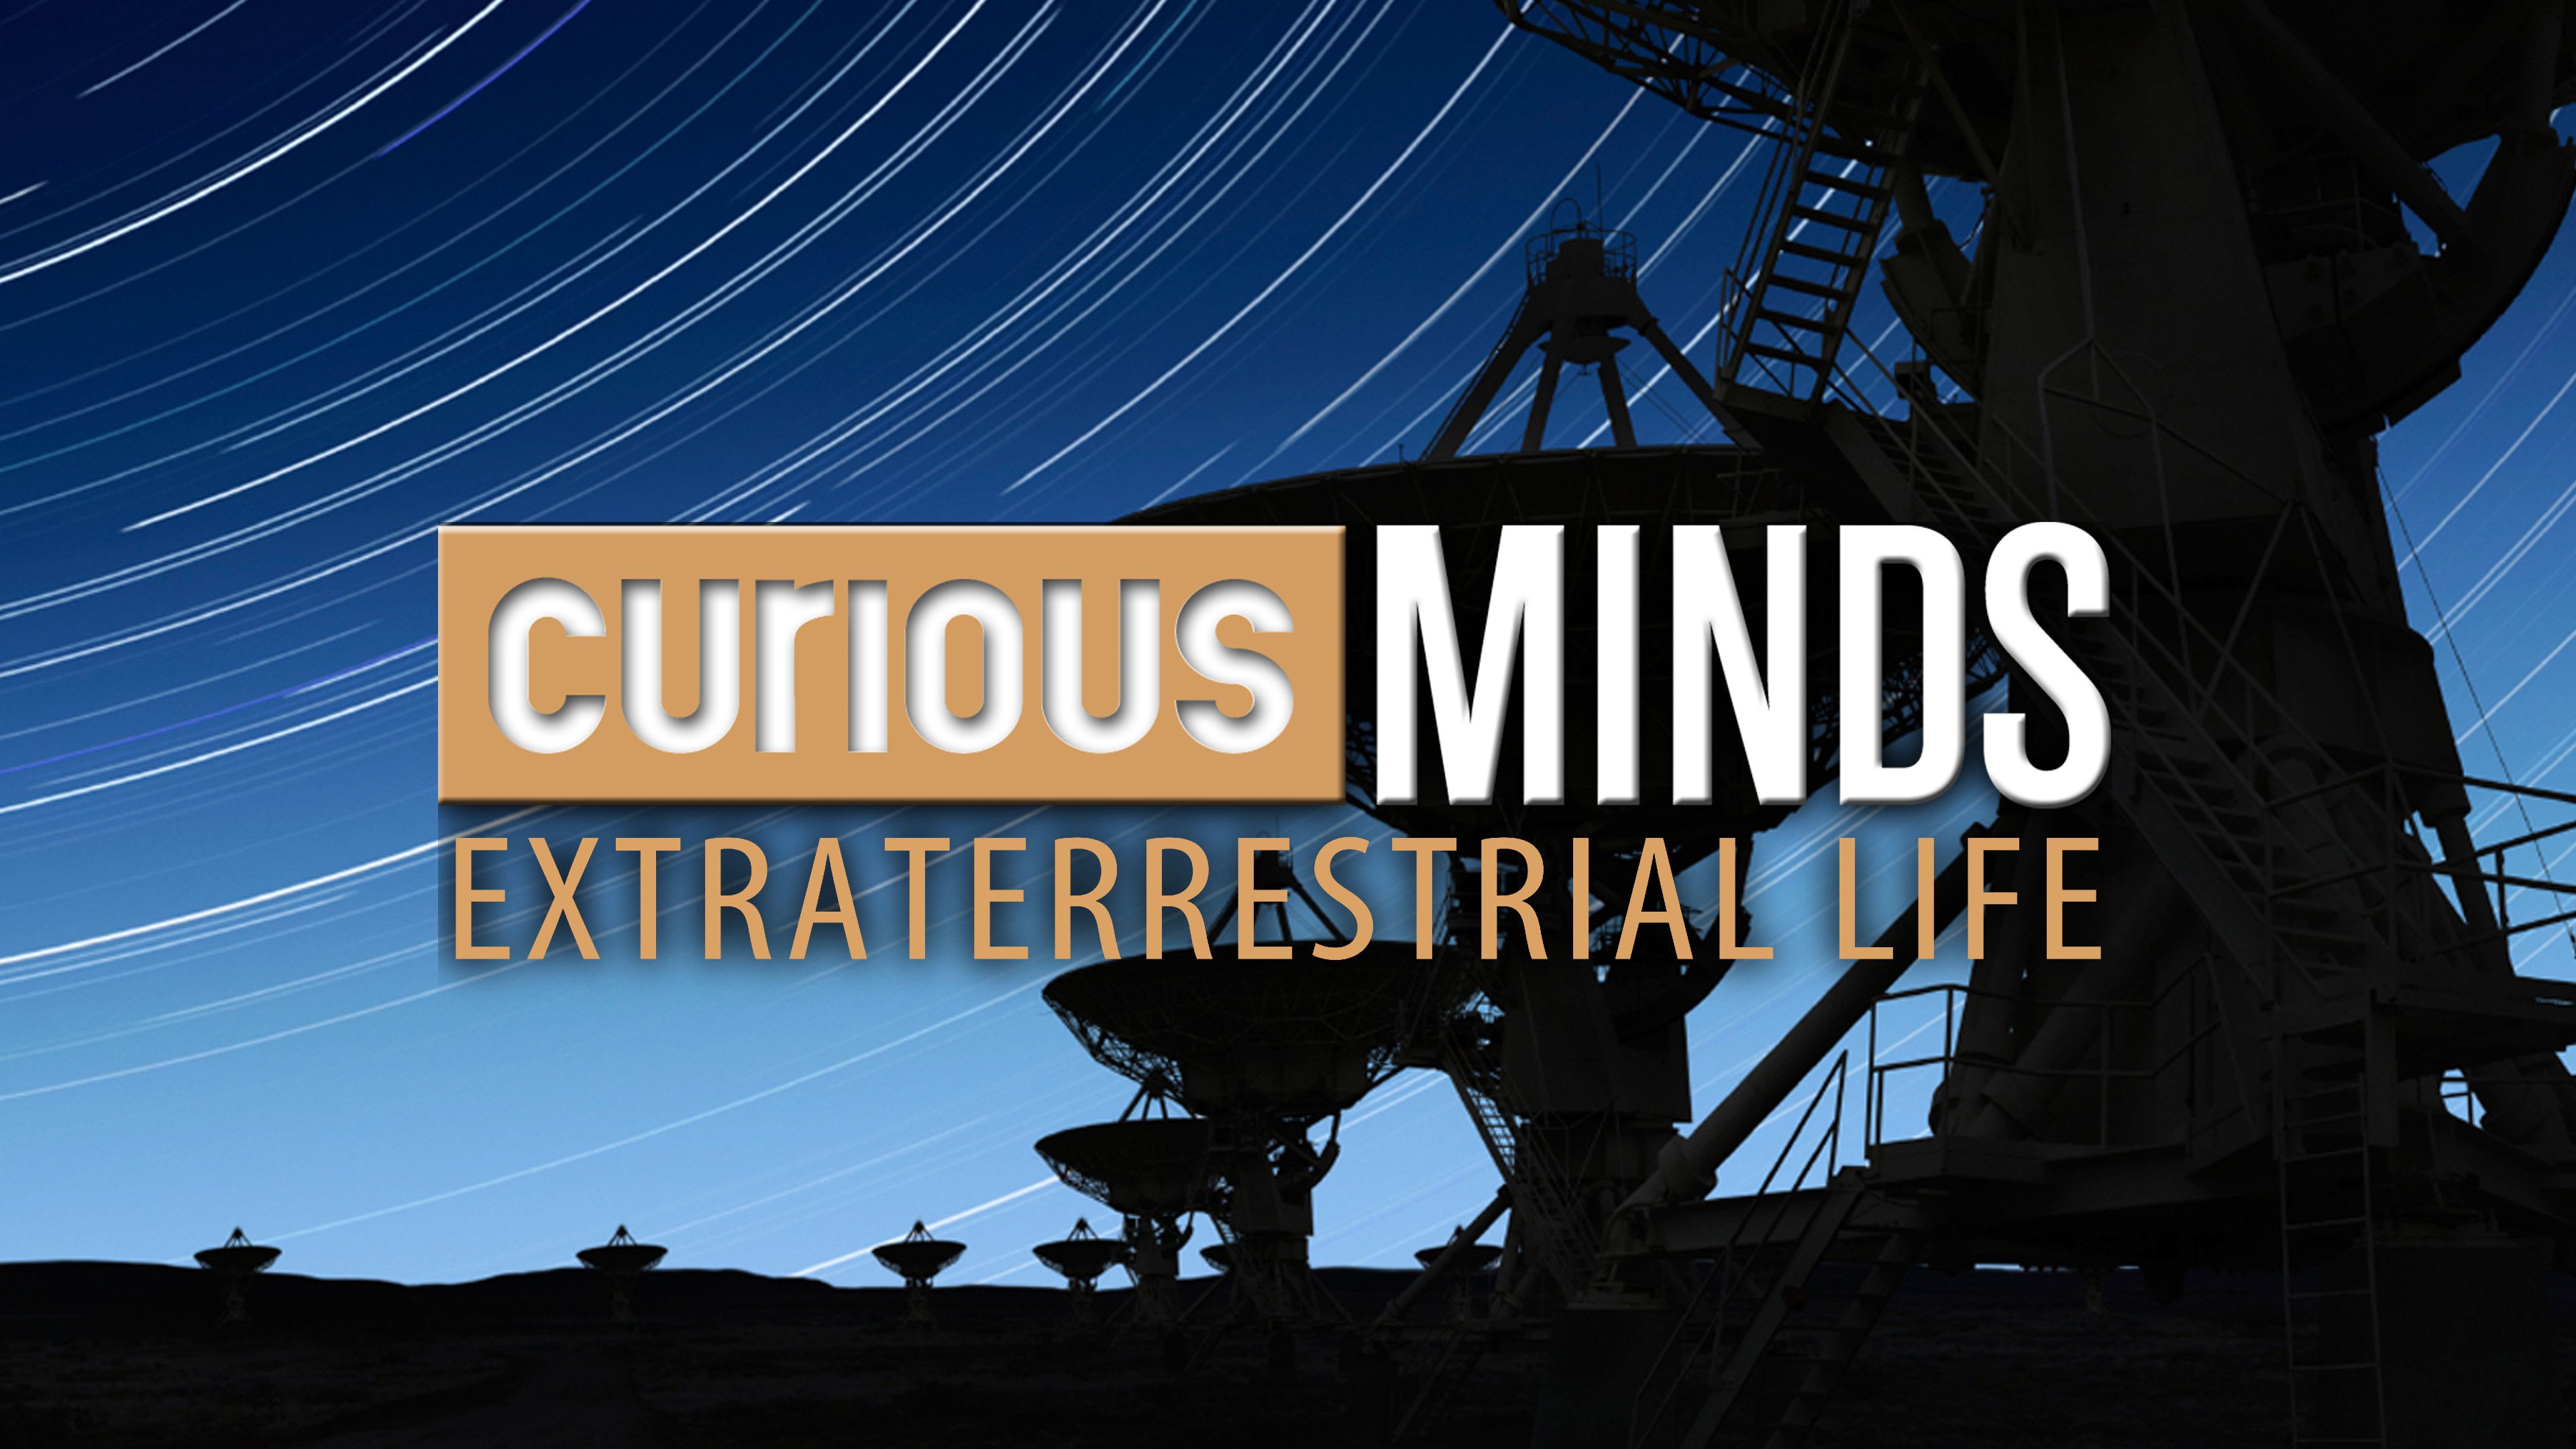 Curious Minds: Extraterrestrial Life